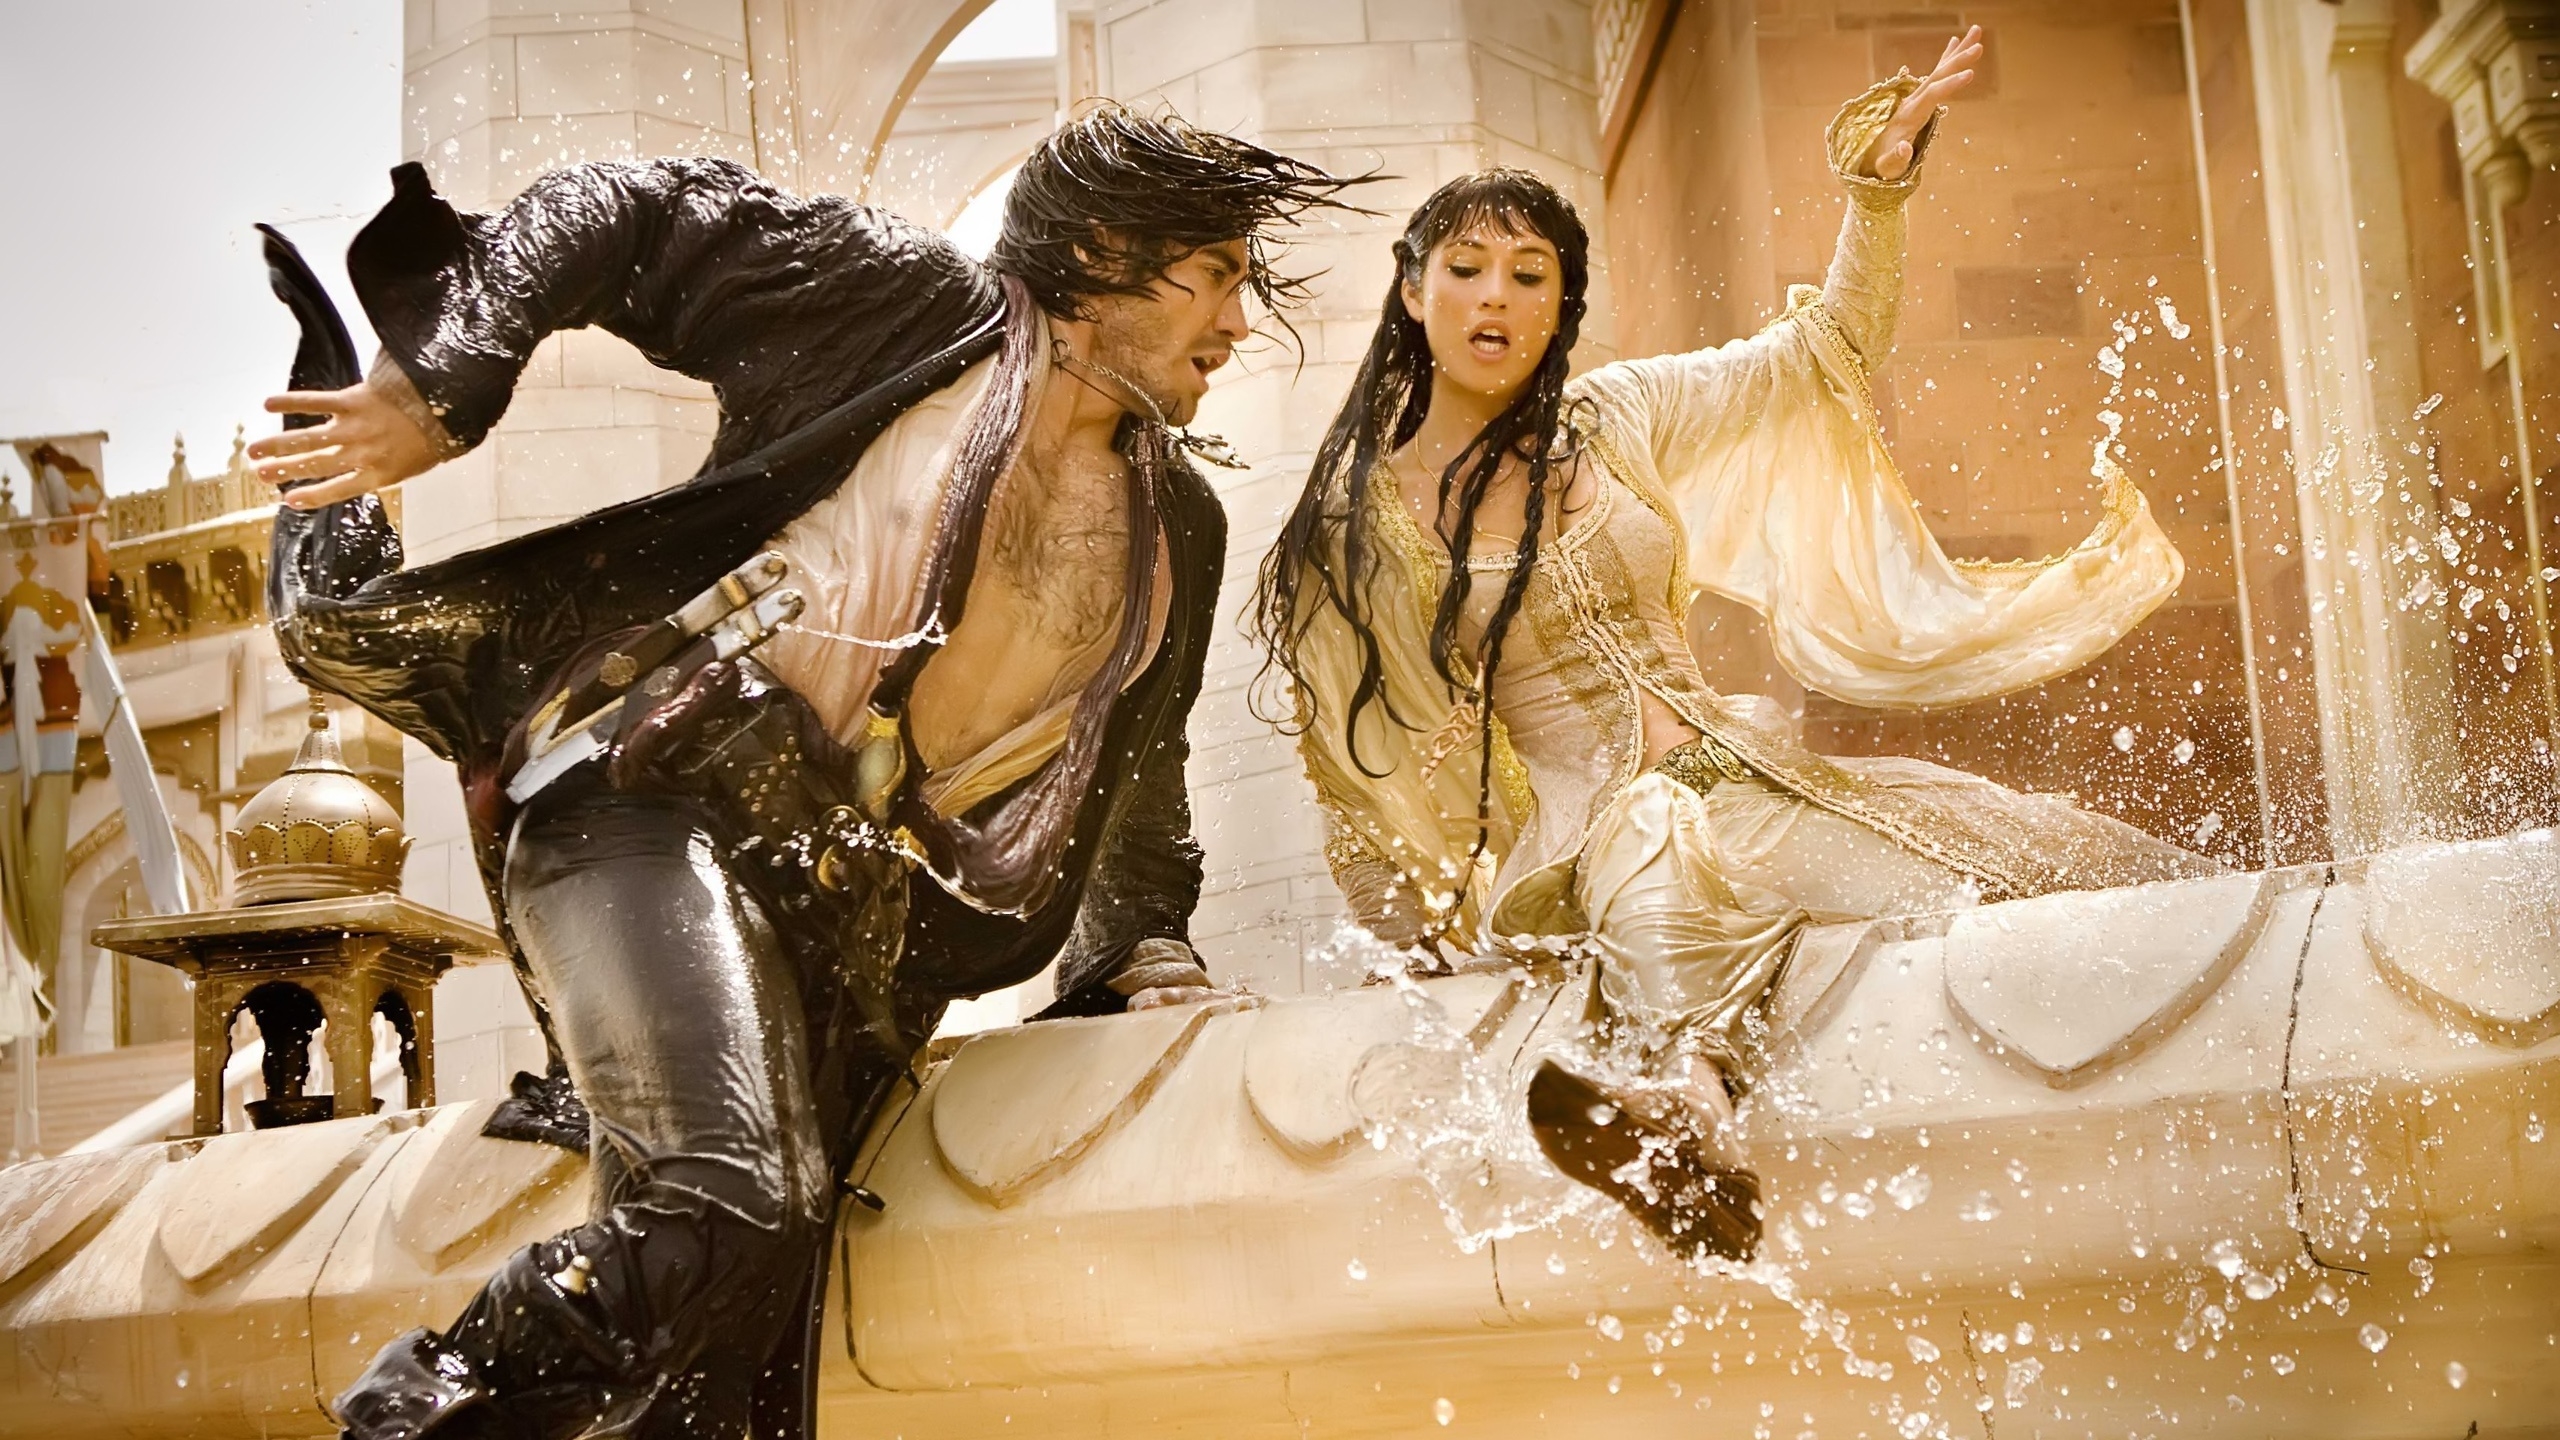 Prince Of Persia: The Sands of Time Movie for 2560x1440 HDTV resolution